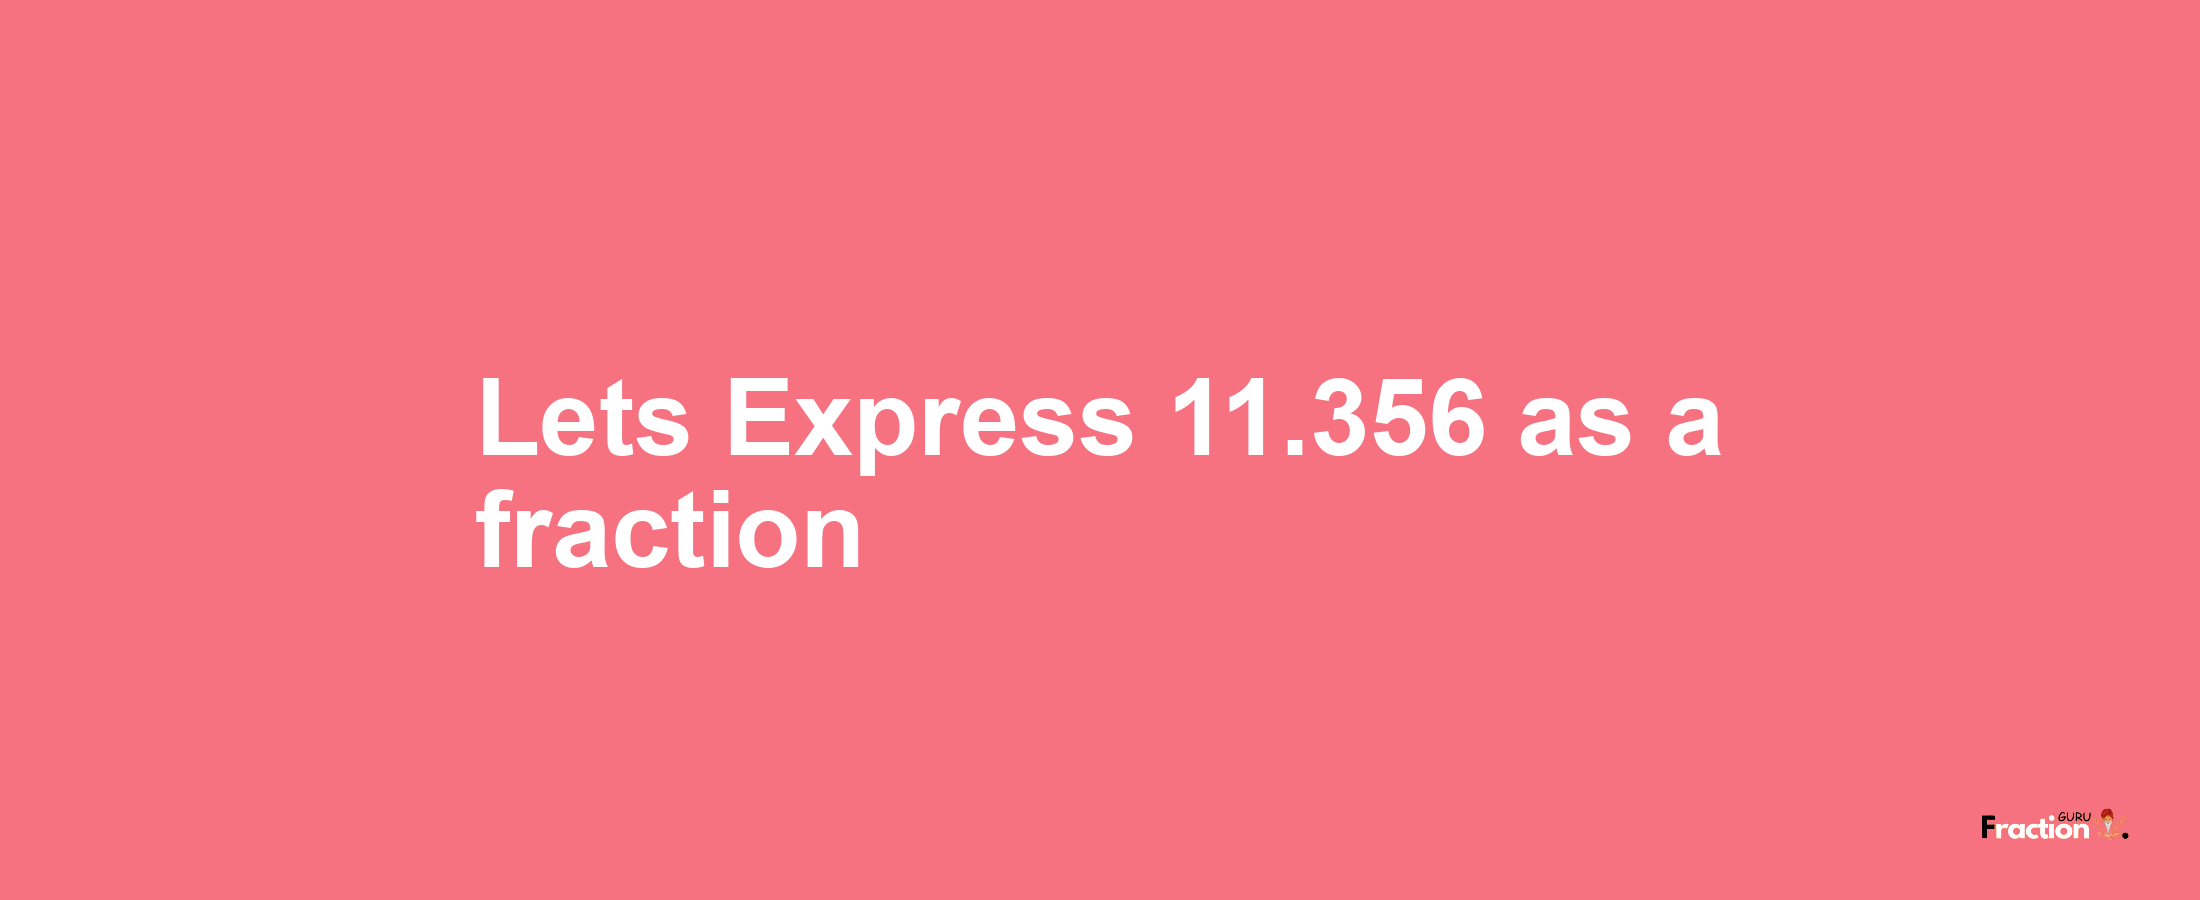 Lets Express 11.356 as afraction